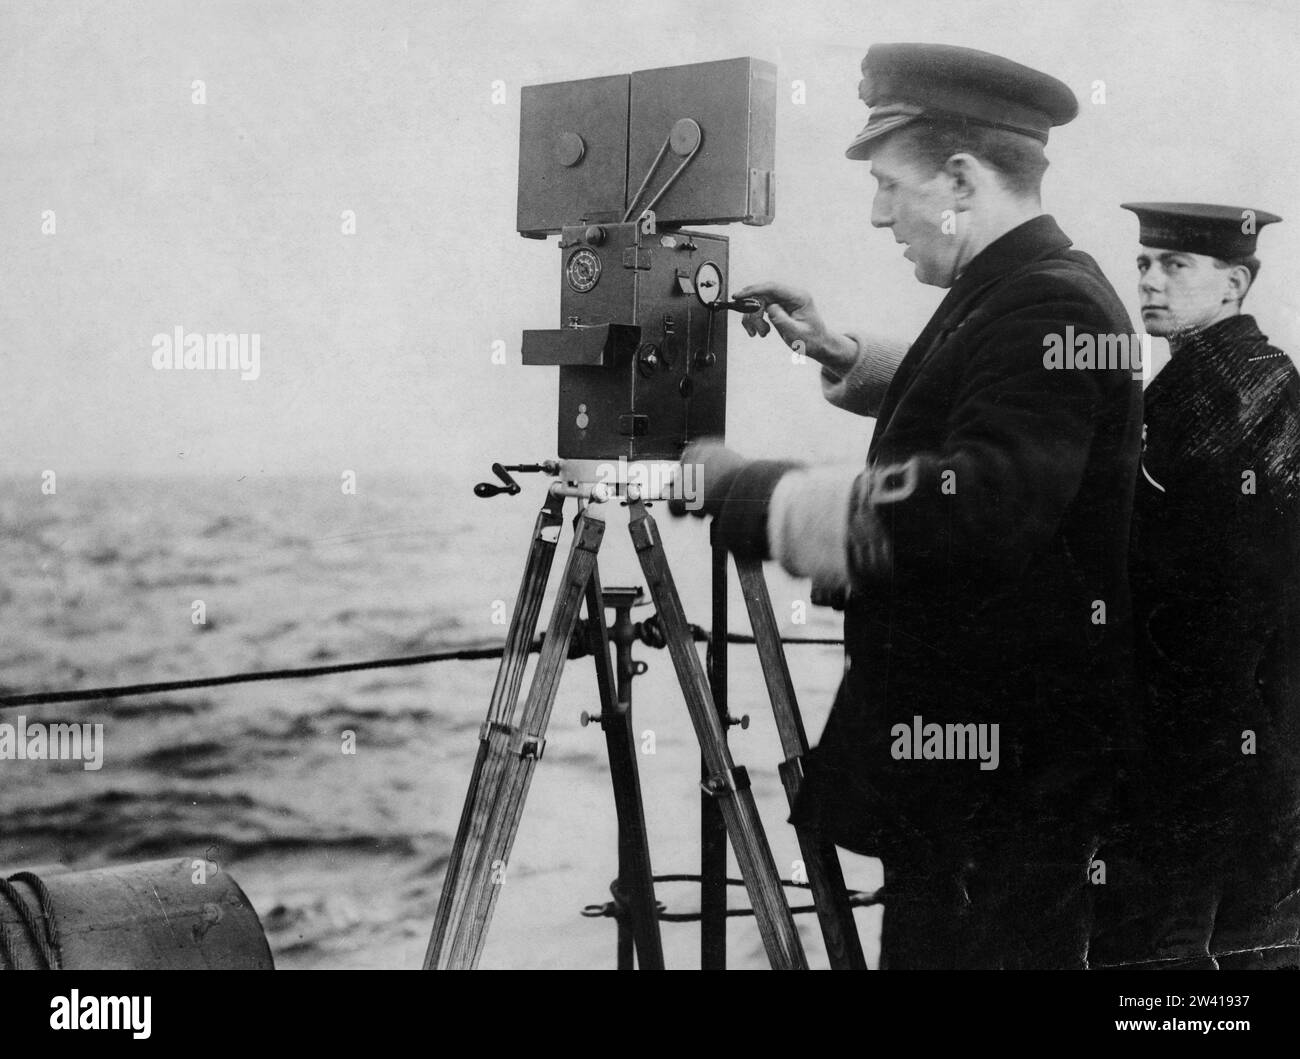 Official photograph showing Navy officer filming aboard a ship Stock Photo